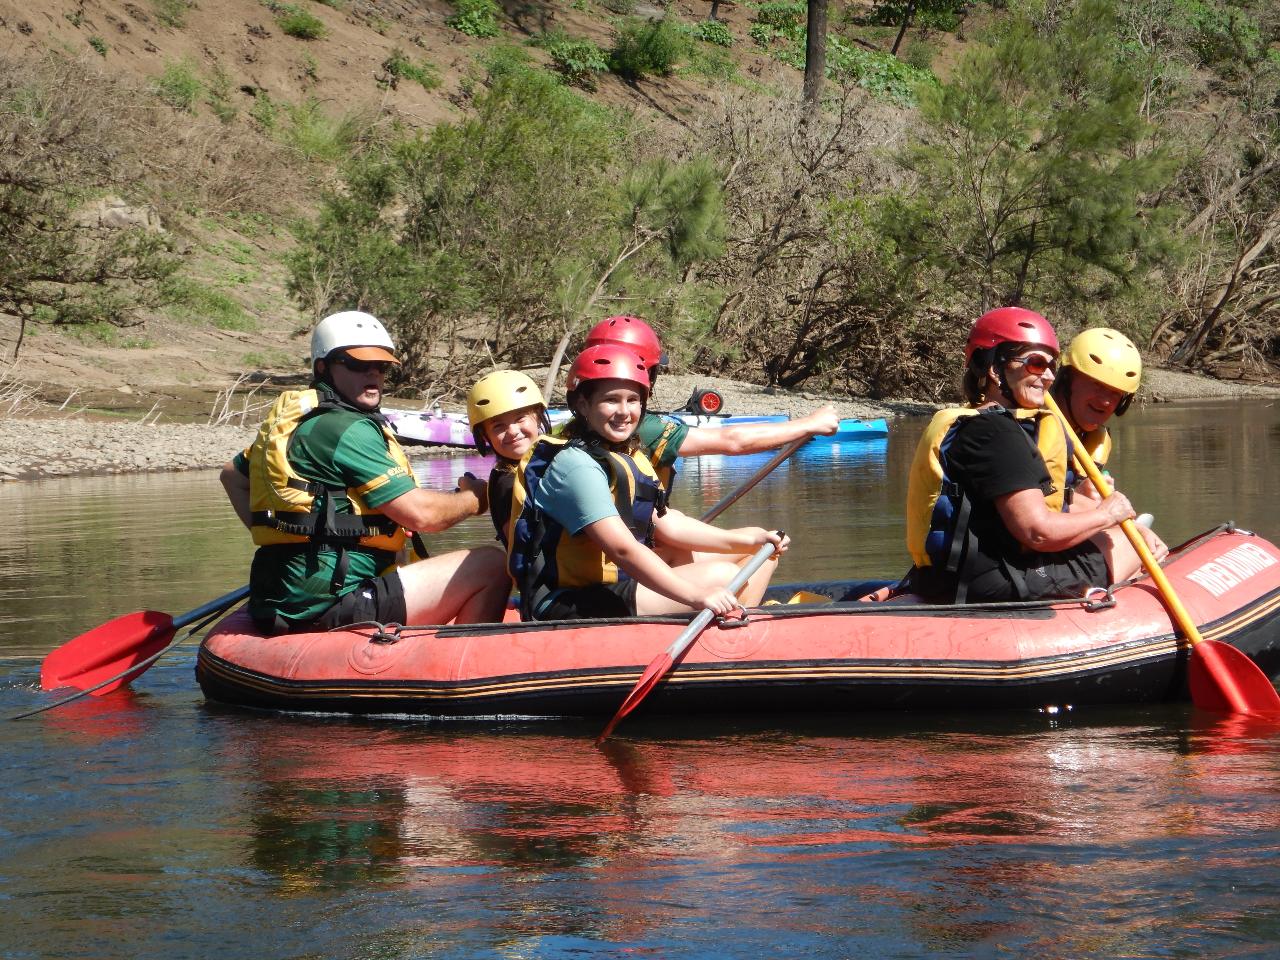 Family-friendly Whitewater Rafting - TWO DAYS